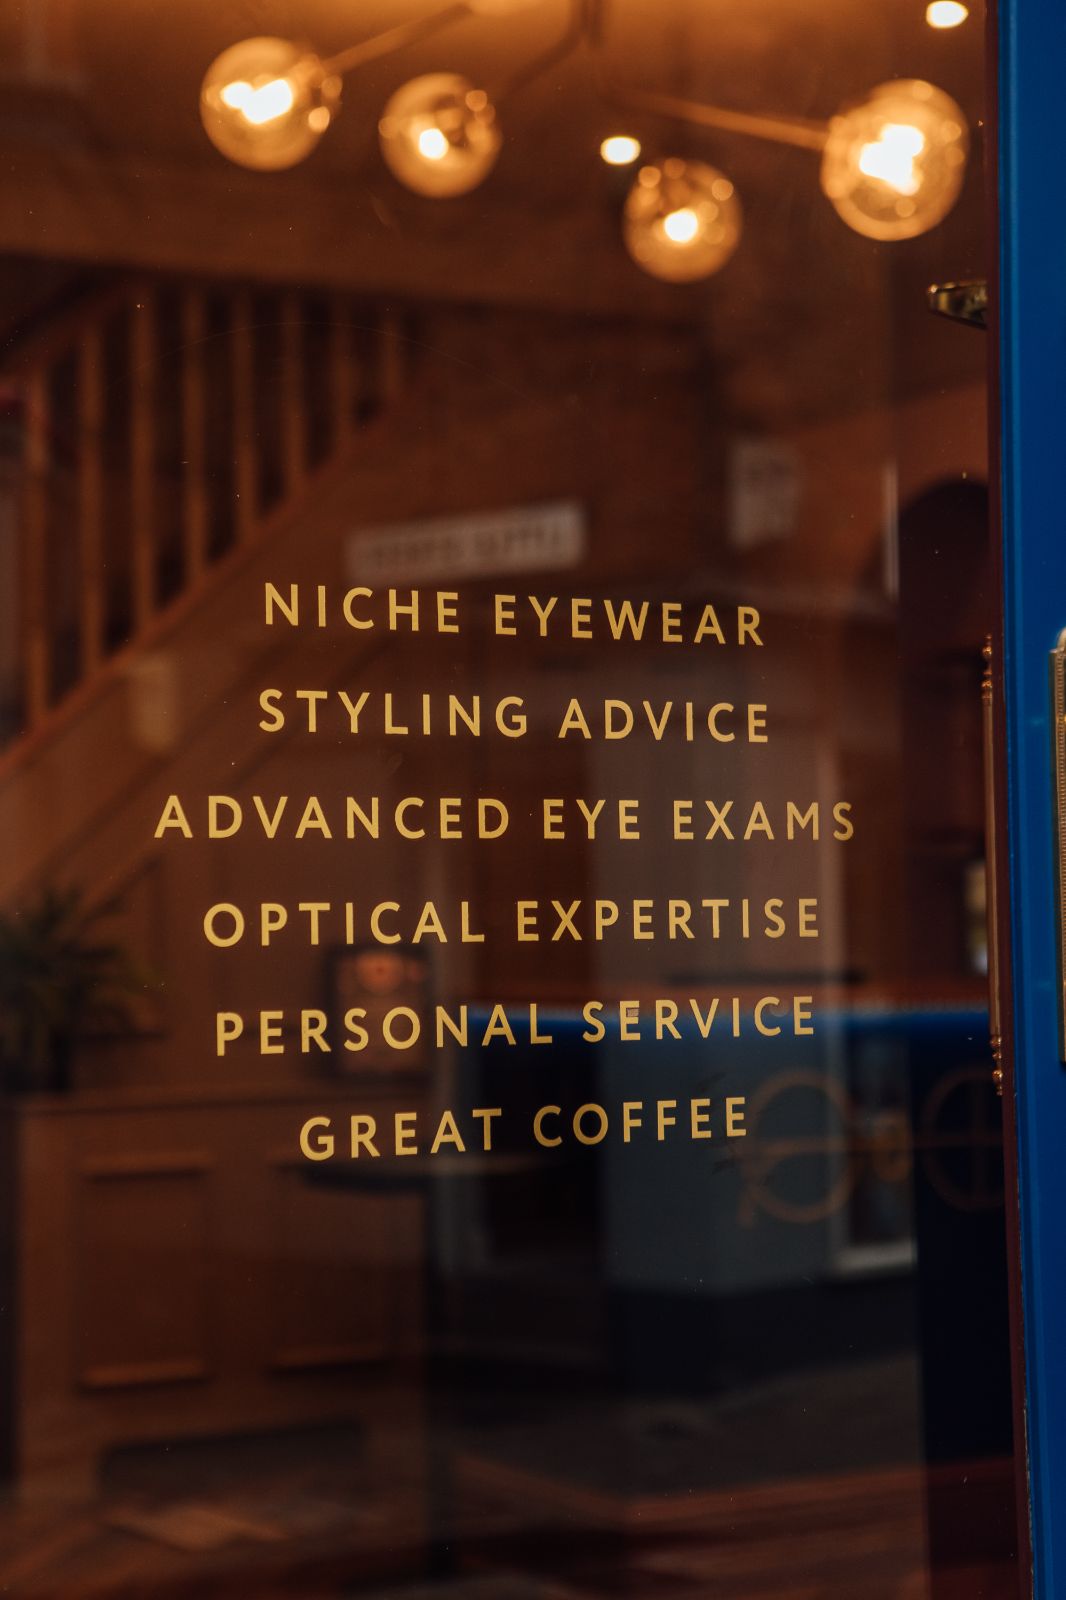 Painted on window: Niche eyewear, styling advice, advanced eye exams, optical expertise, personal service, great coffee